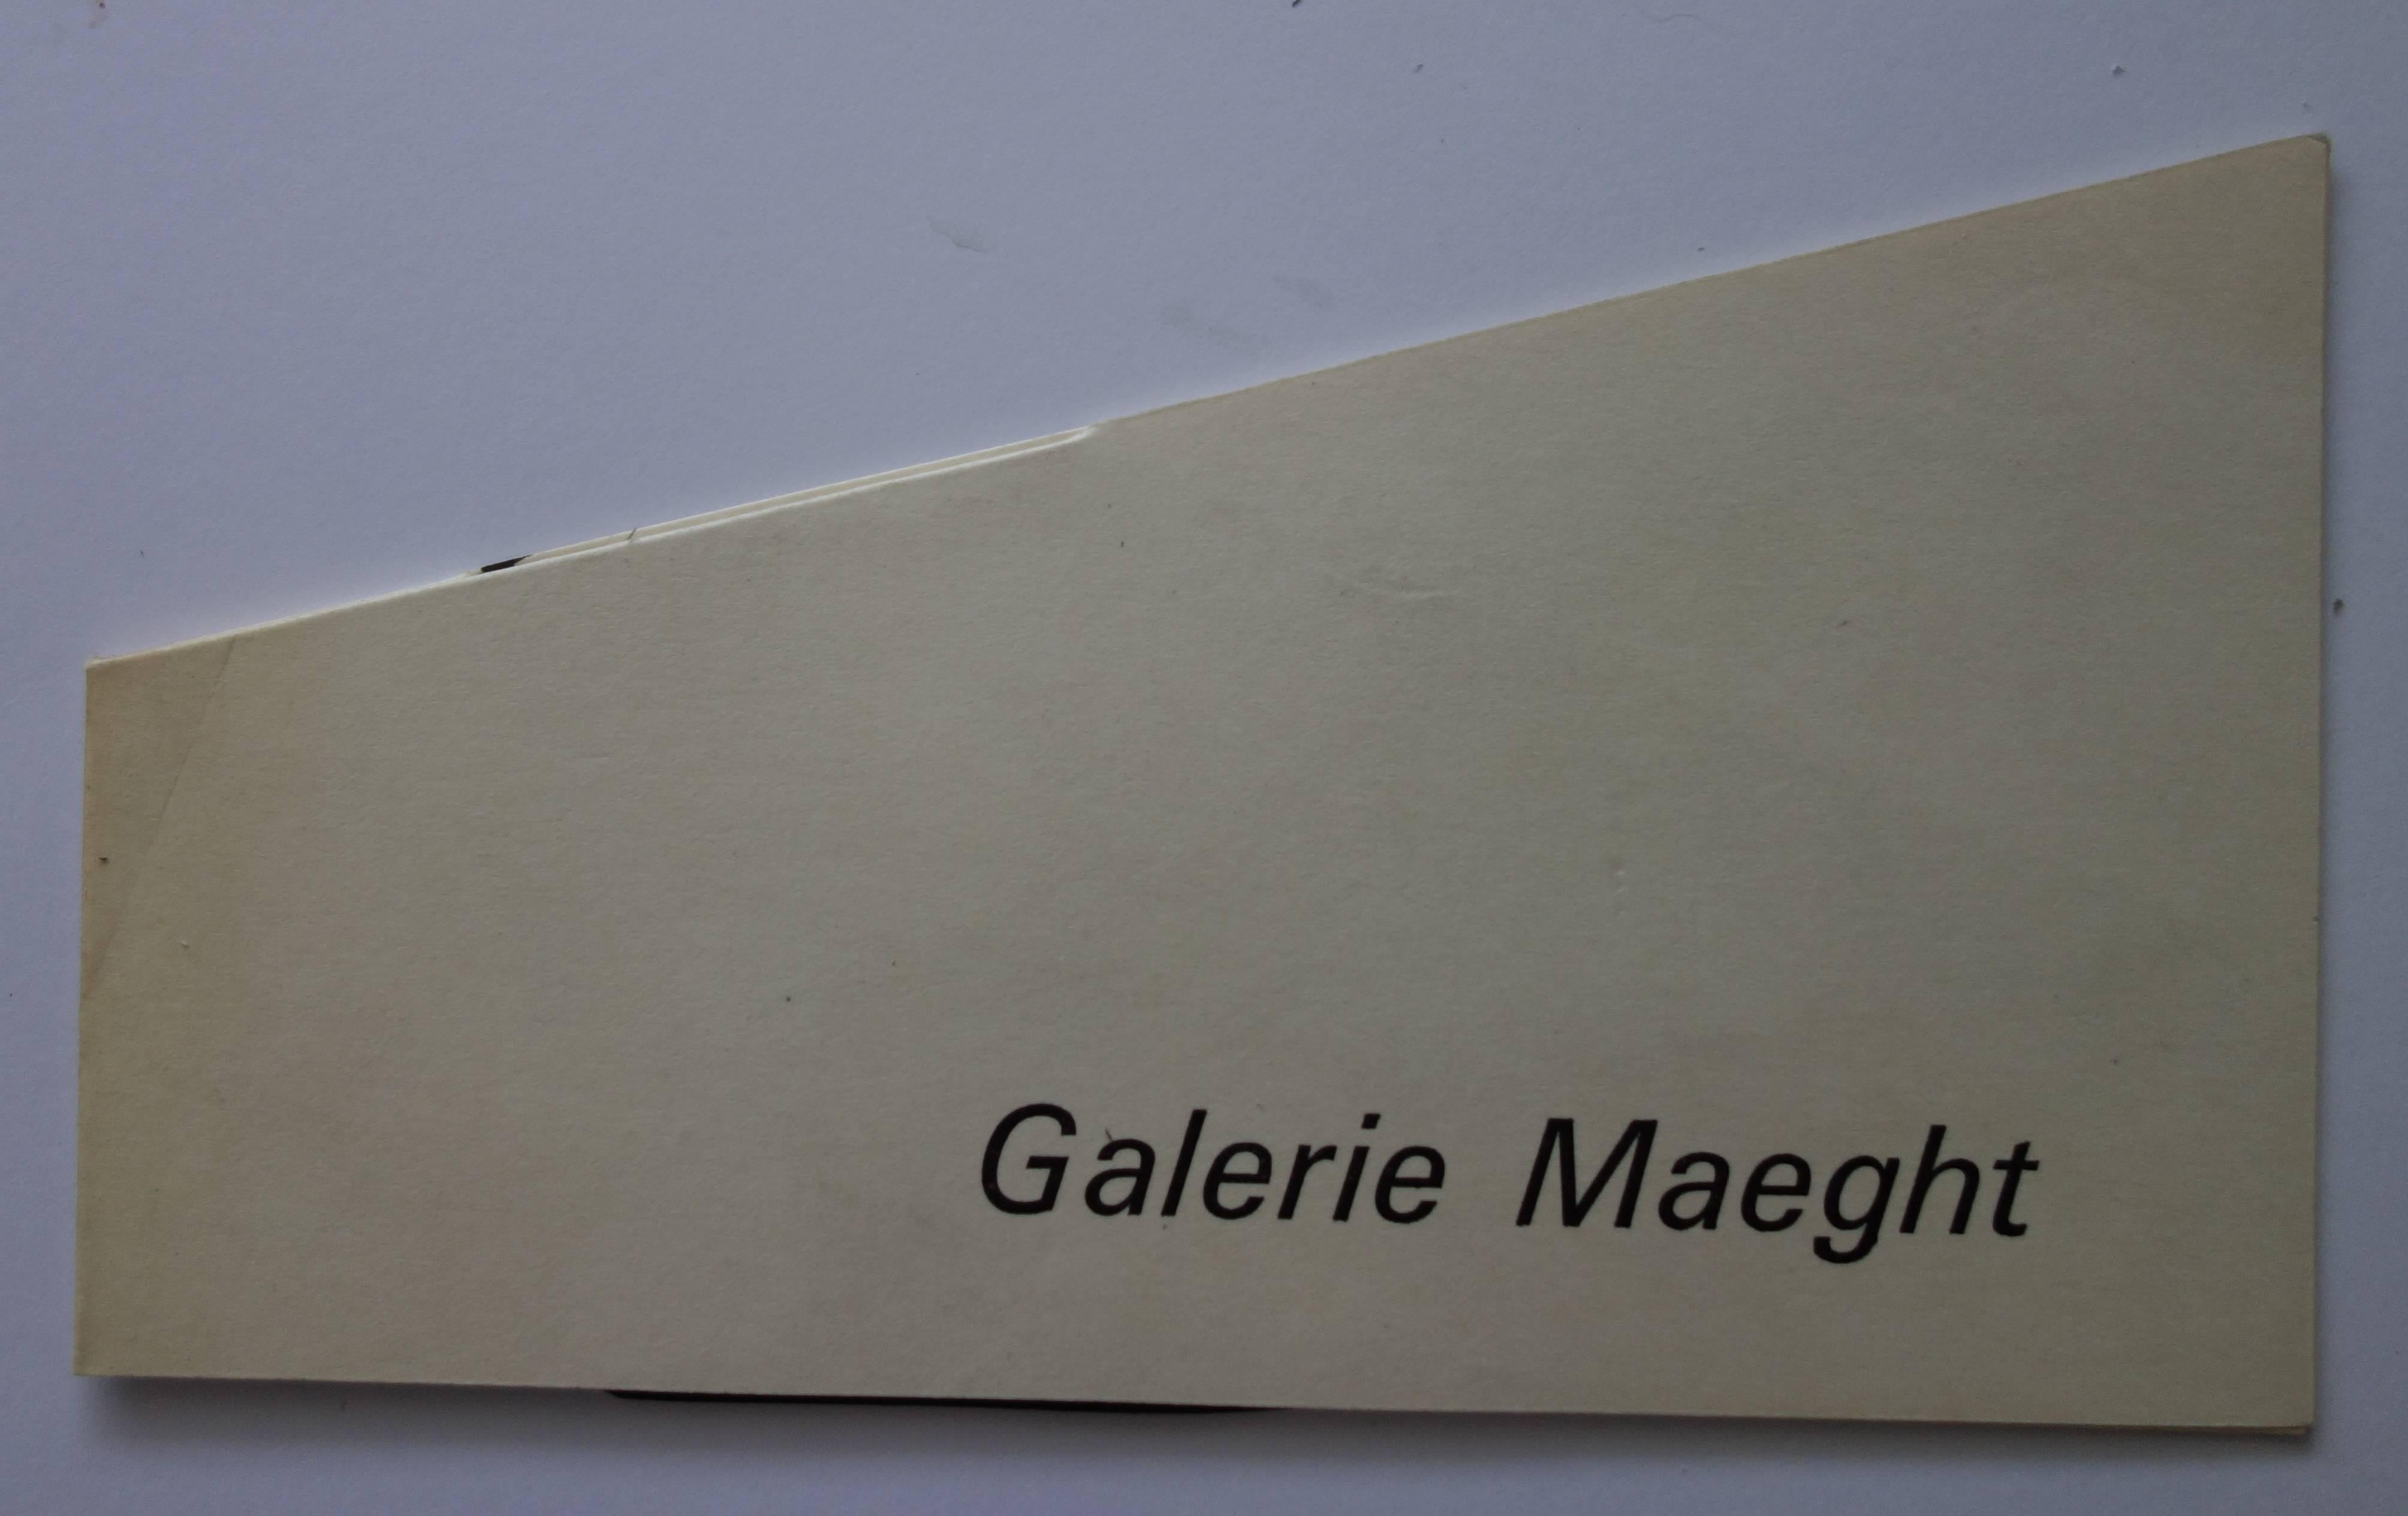 Stabiles - Original lithographic pop-up card - Plate signed - Maeght 1963 - Gray Abstract Print by Alexander Calder